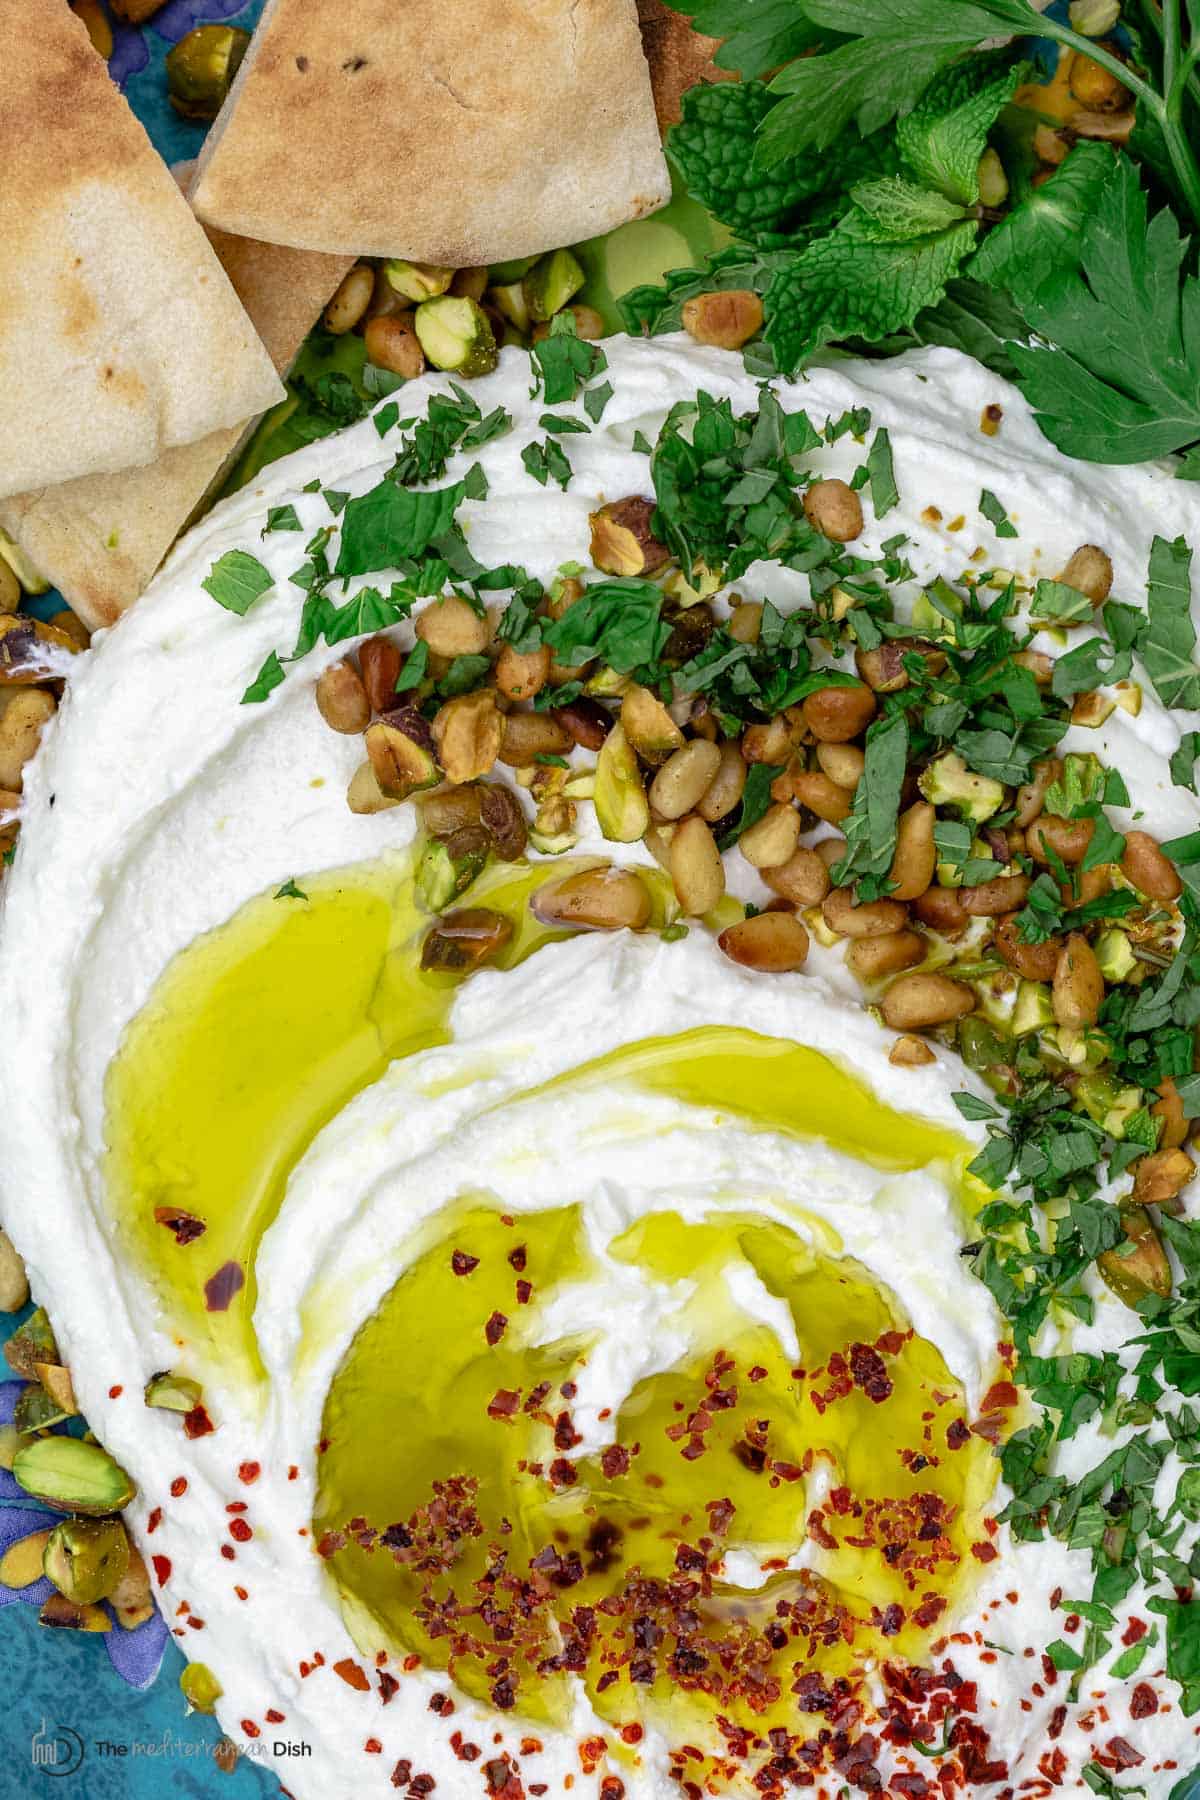 A close-up of whipped feta with olive oil, pine nuts, pistachios and herbs